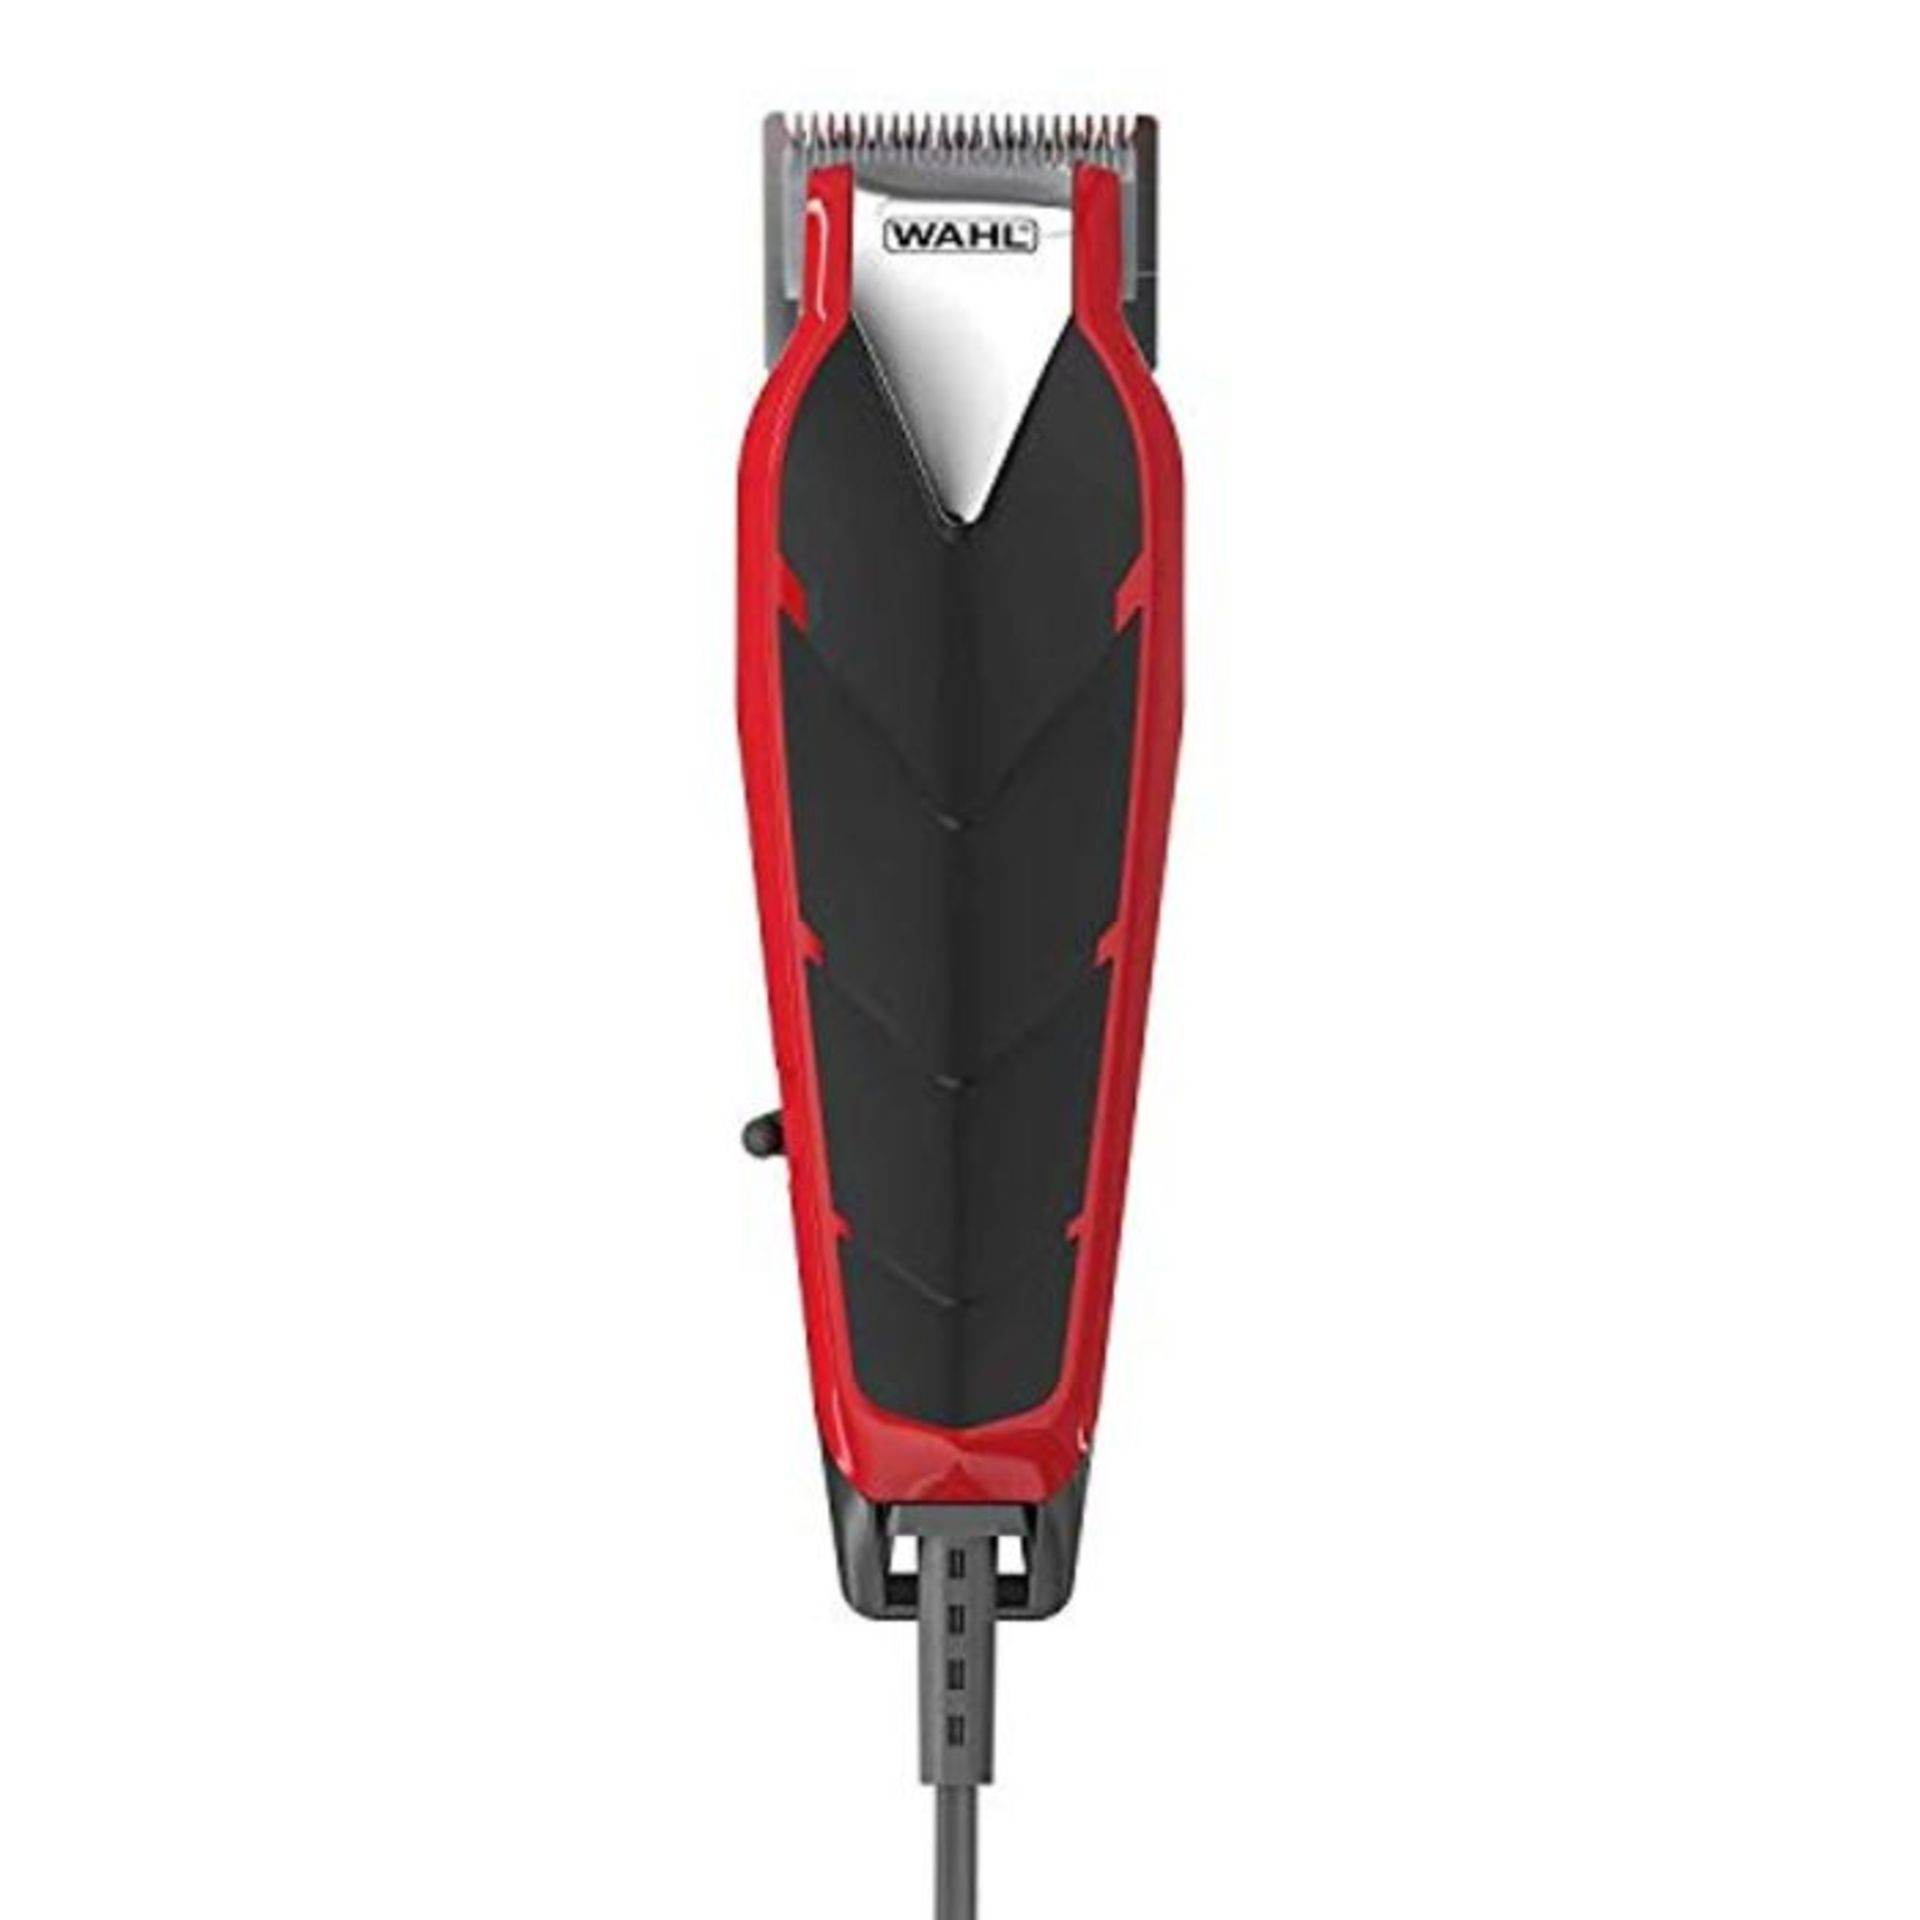 Wahl Hair Clippers for Men, Baldfader Plus Afro Head Shaver Men's Hair Clippers, Baldi